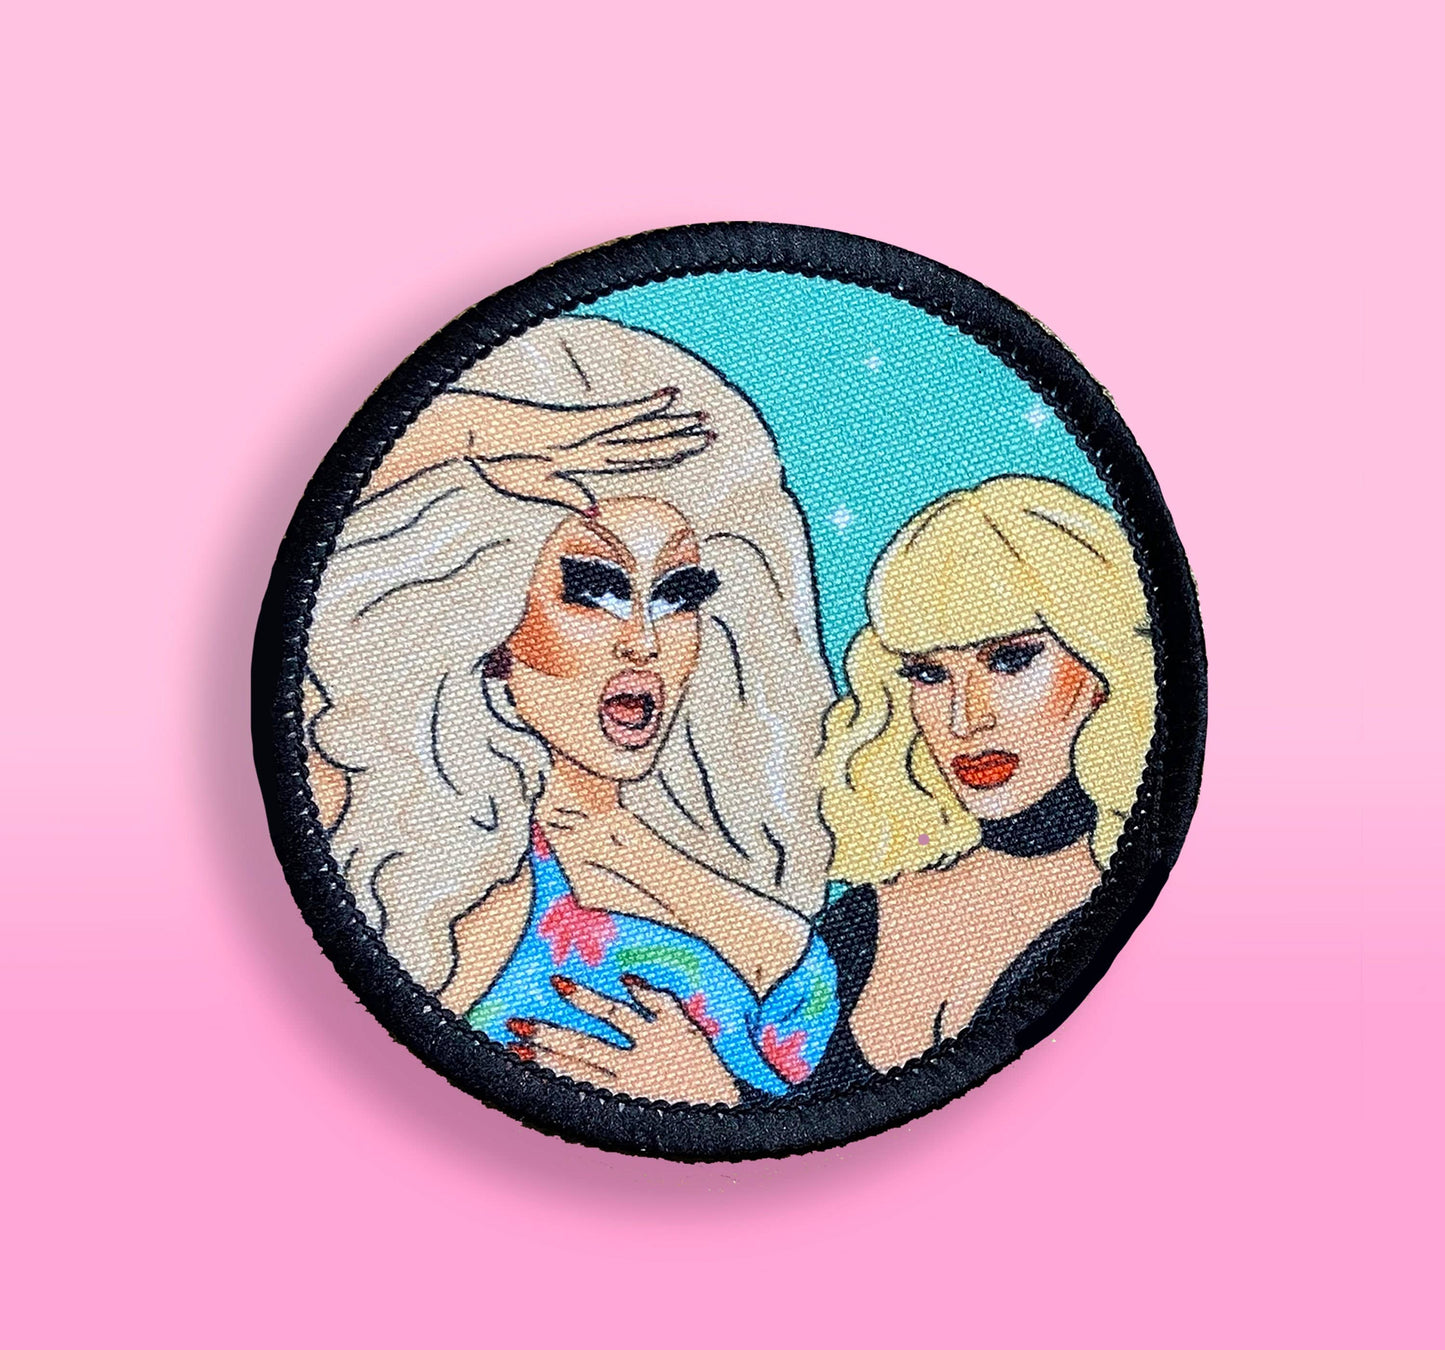 Trixie and Katya Patch | LGBT | Queer | Drag Queen |